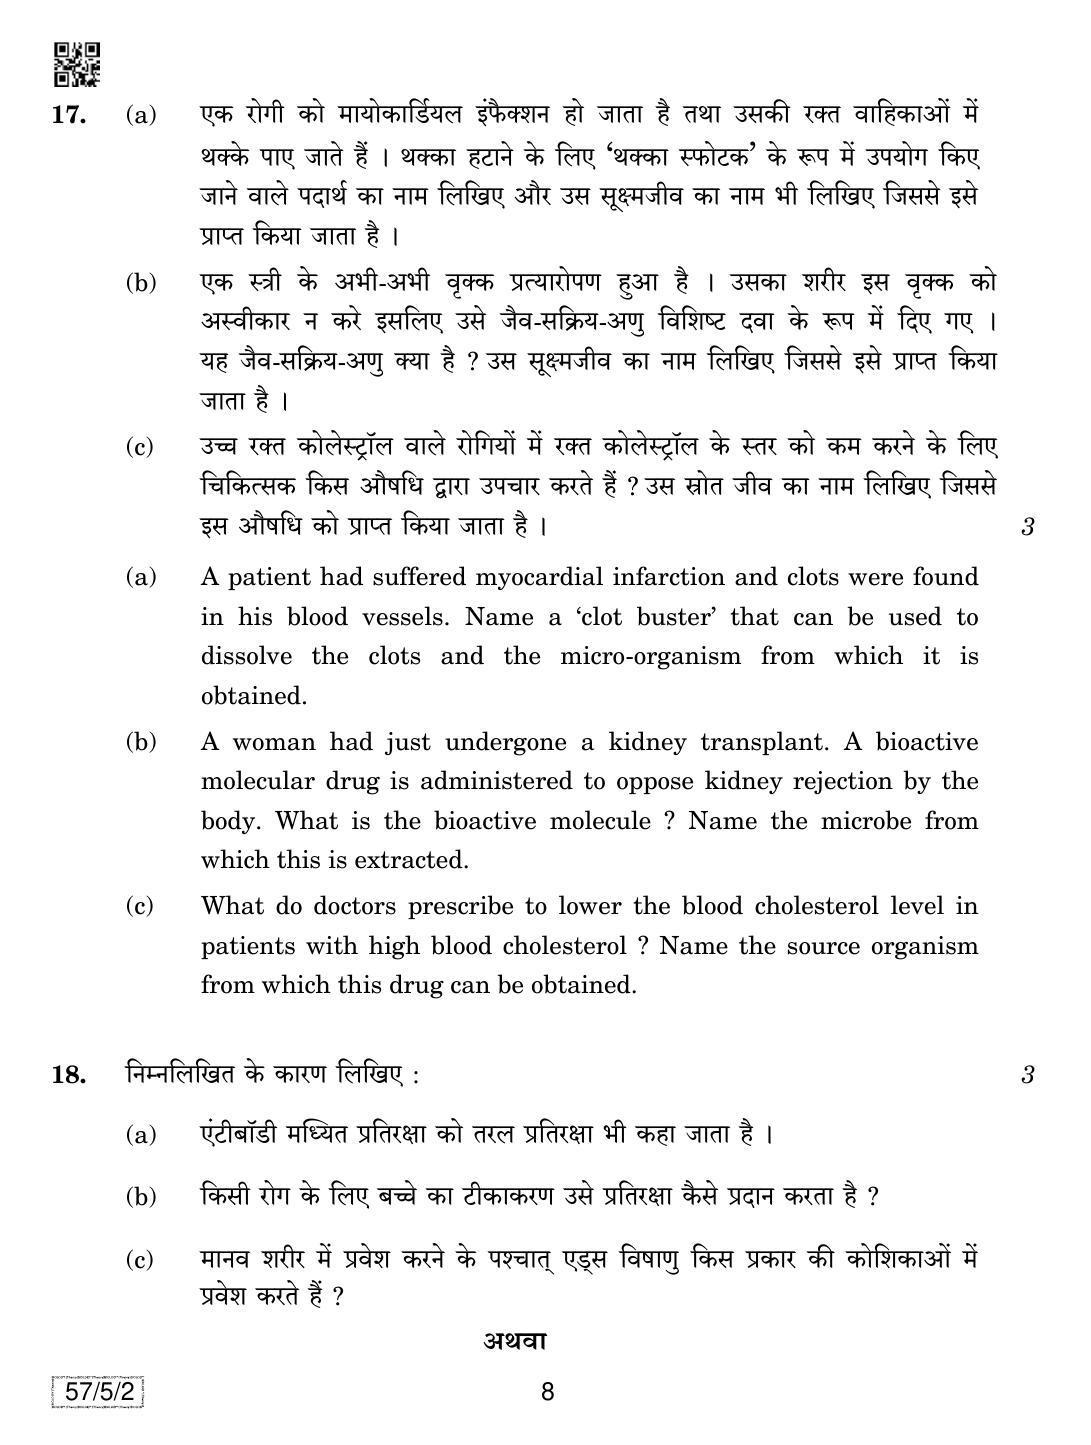 CBSE Class 12 57-5-2 Biology 2019 Question Paper - Page 8